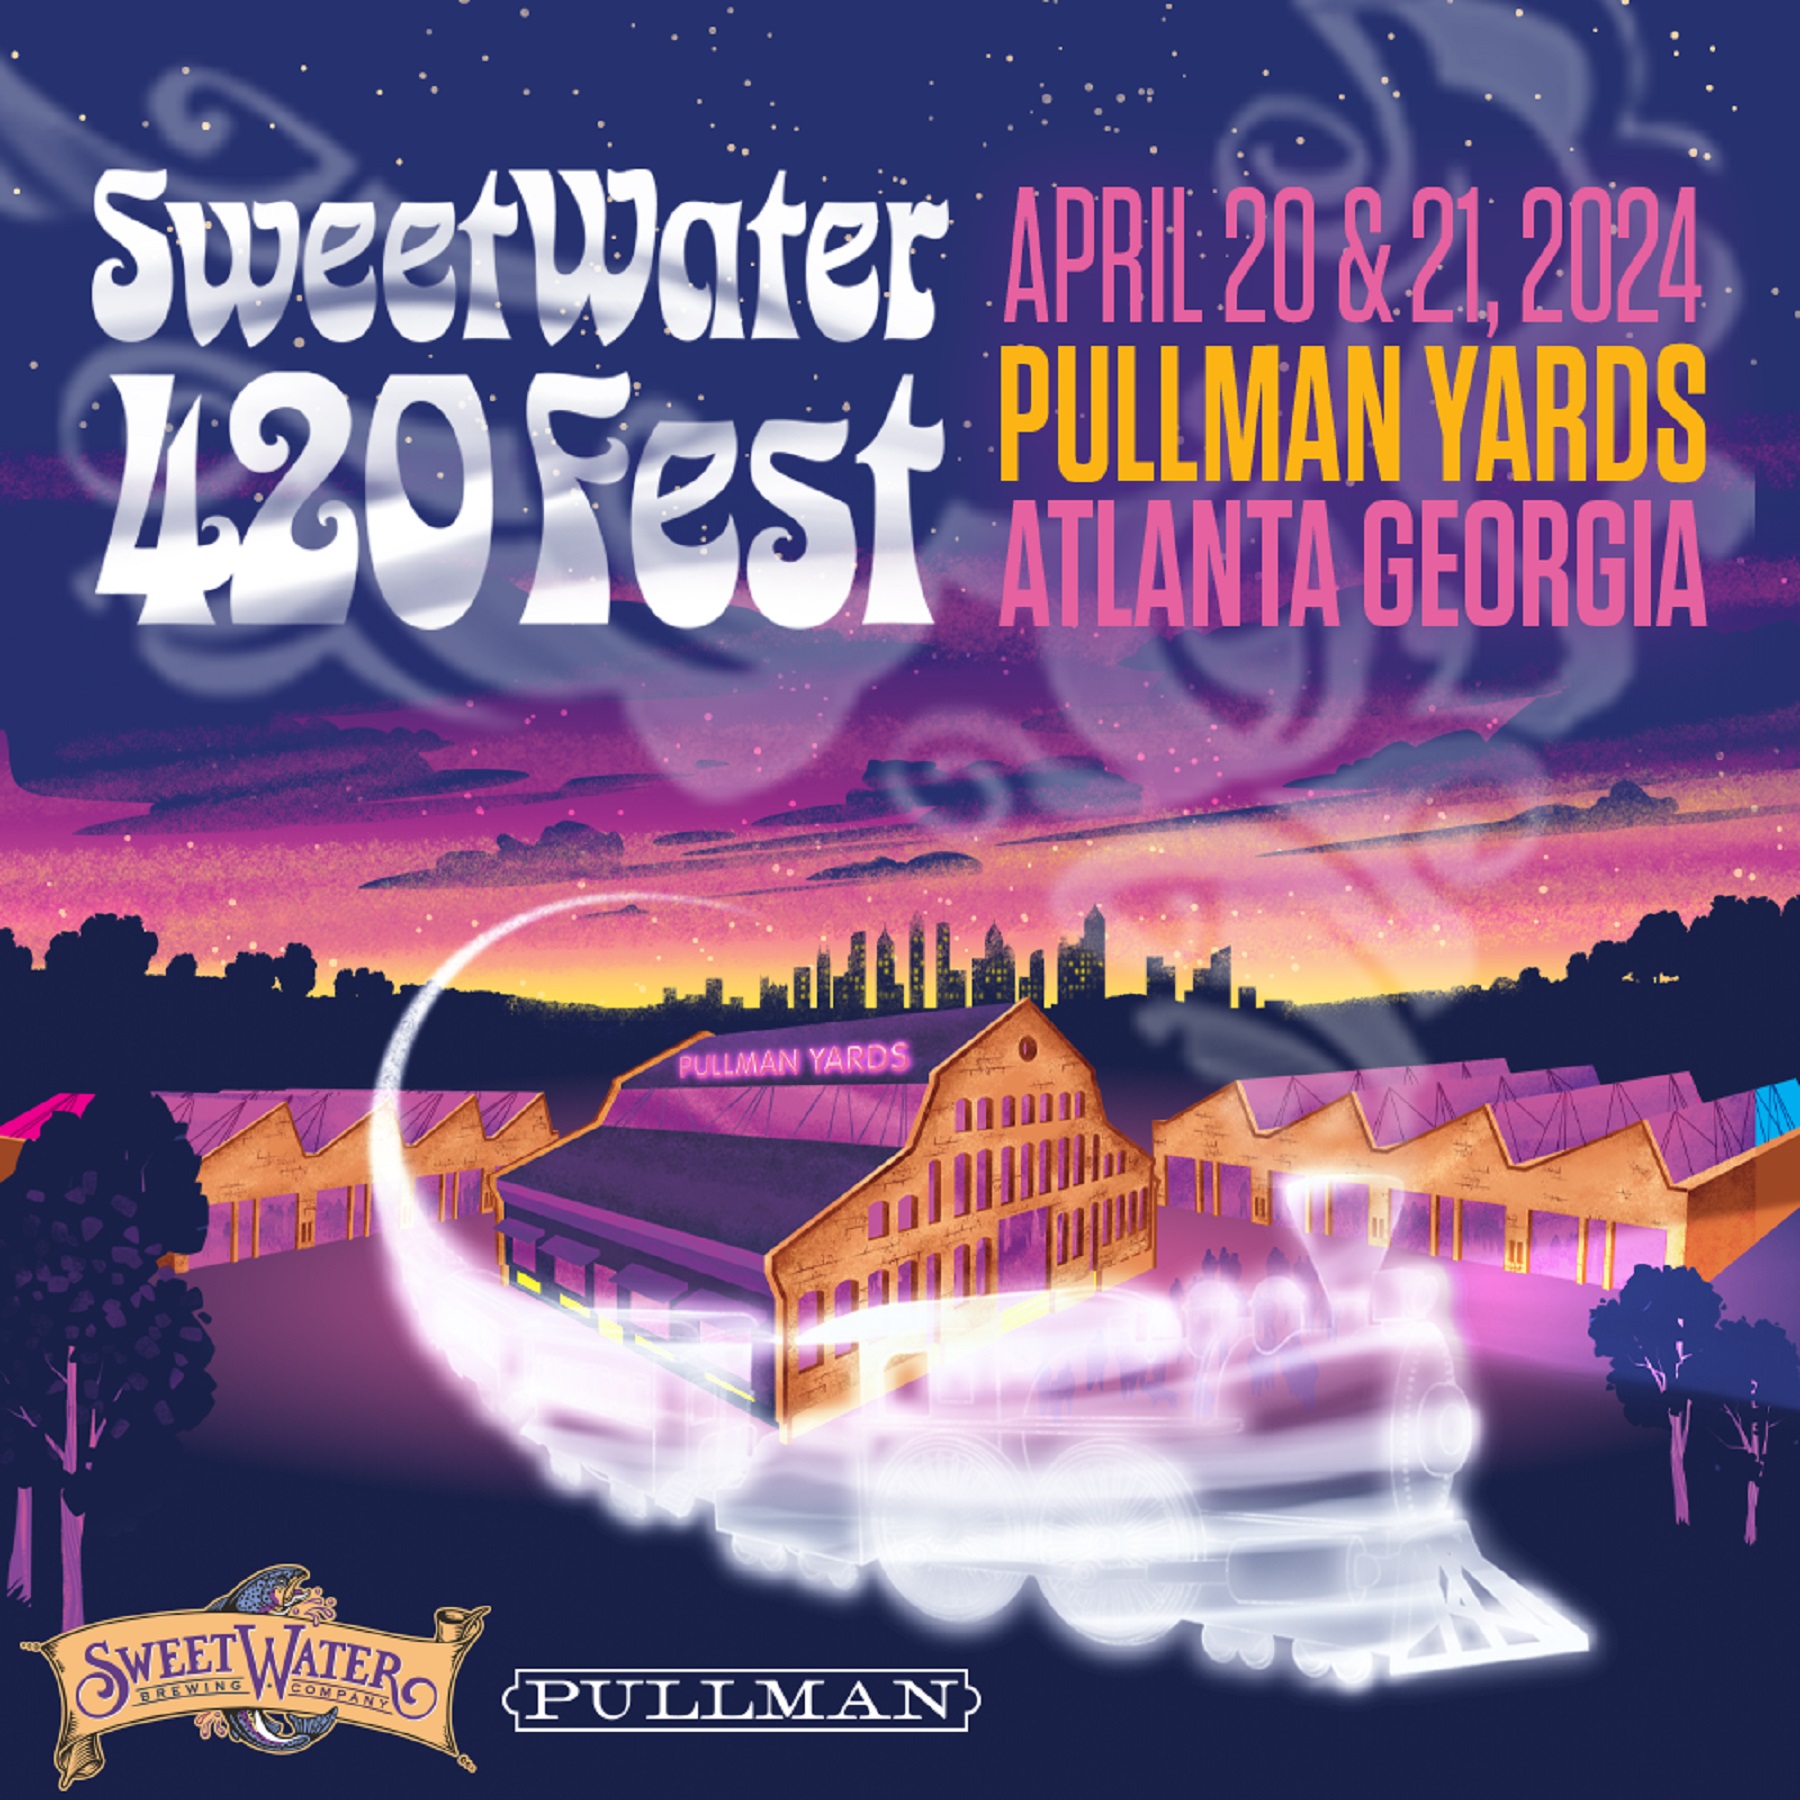 SWEETWATER BREWING AND PULLMAN YARDS PRESENT 420 FEST, APRIL 20 & 21